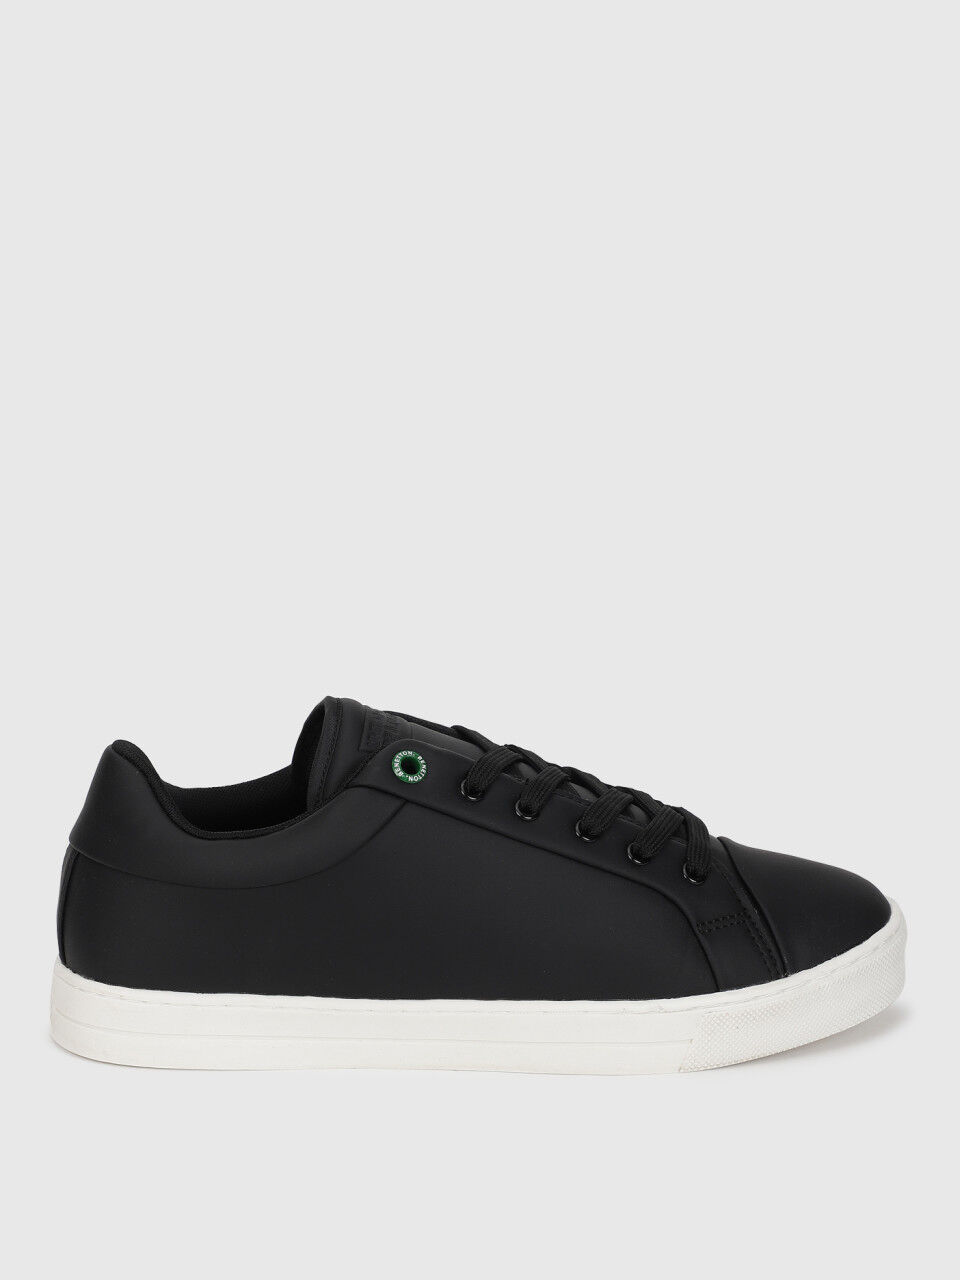 Buy United Colors Of Benetton Men Black Sneakers - Casual Shoes for Men  1550229 | Myntra